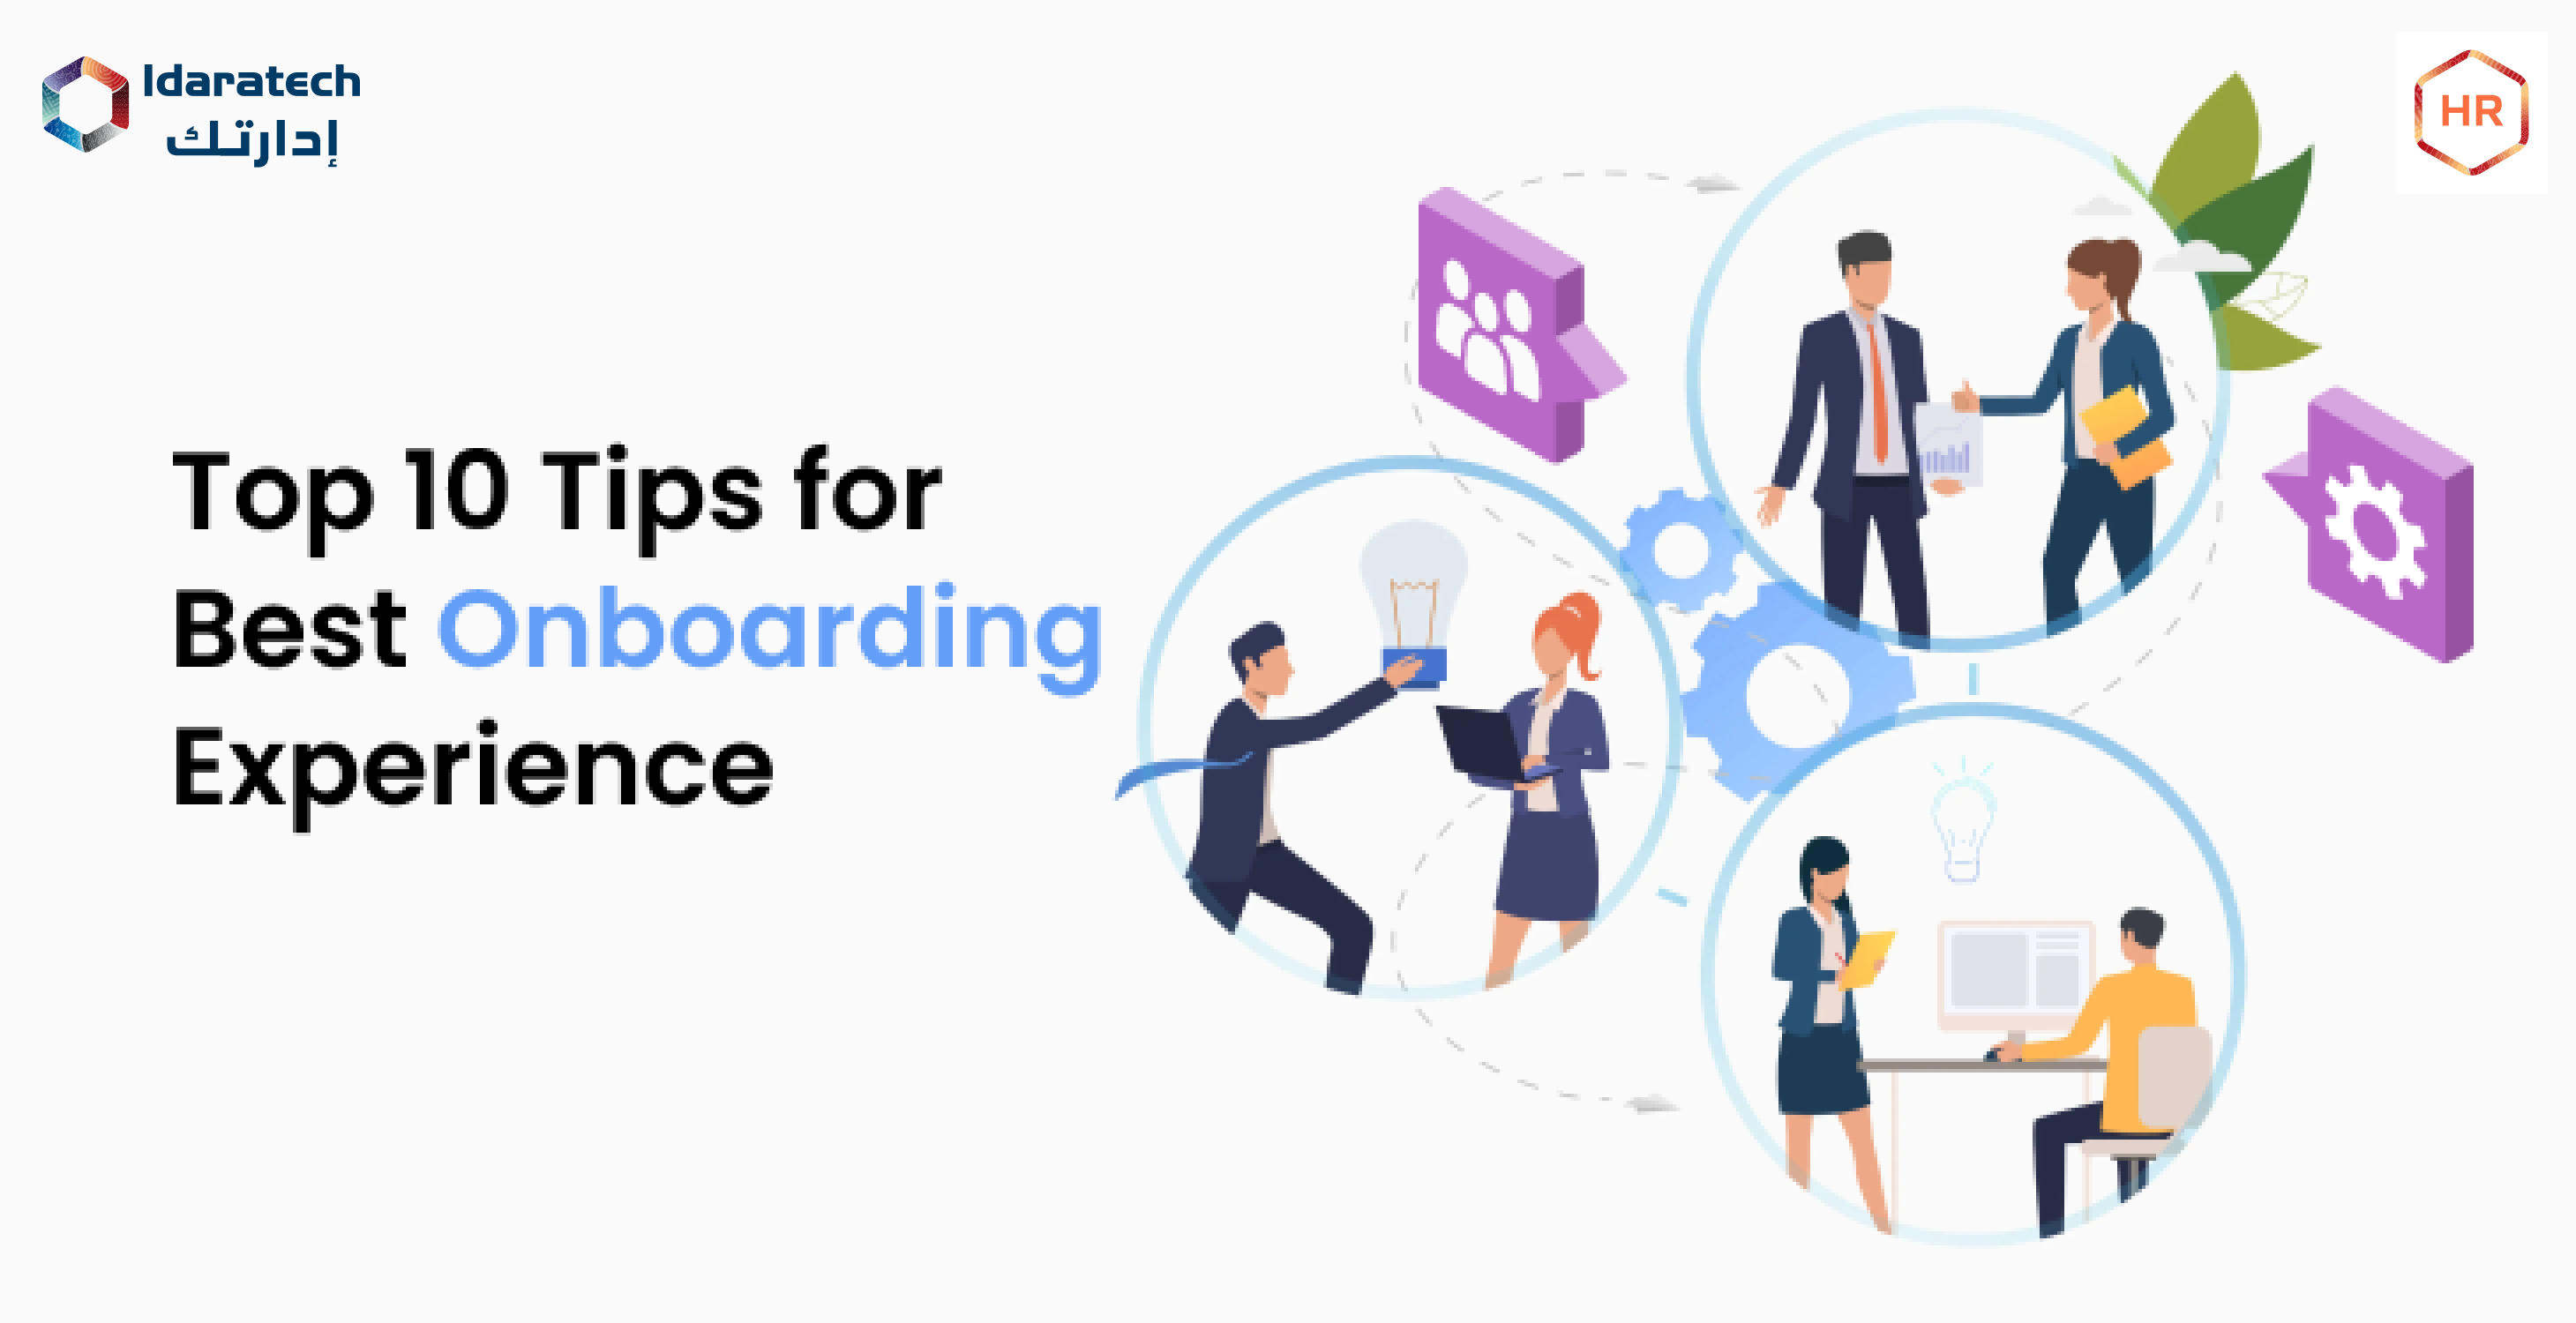 Top 10 Tips for Best Onboarding Experience